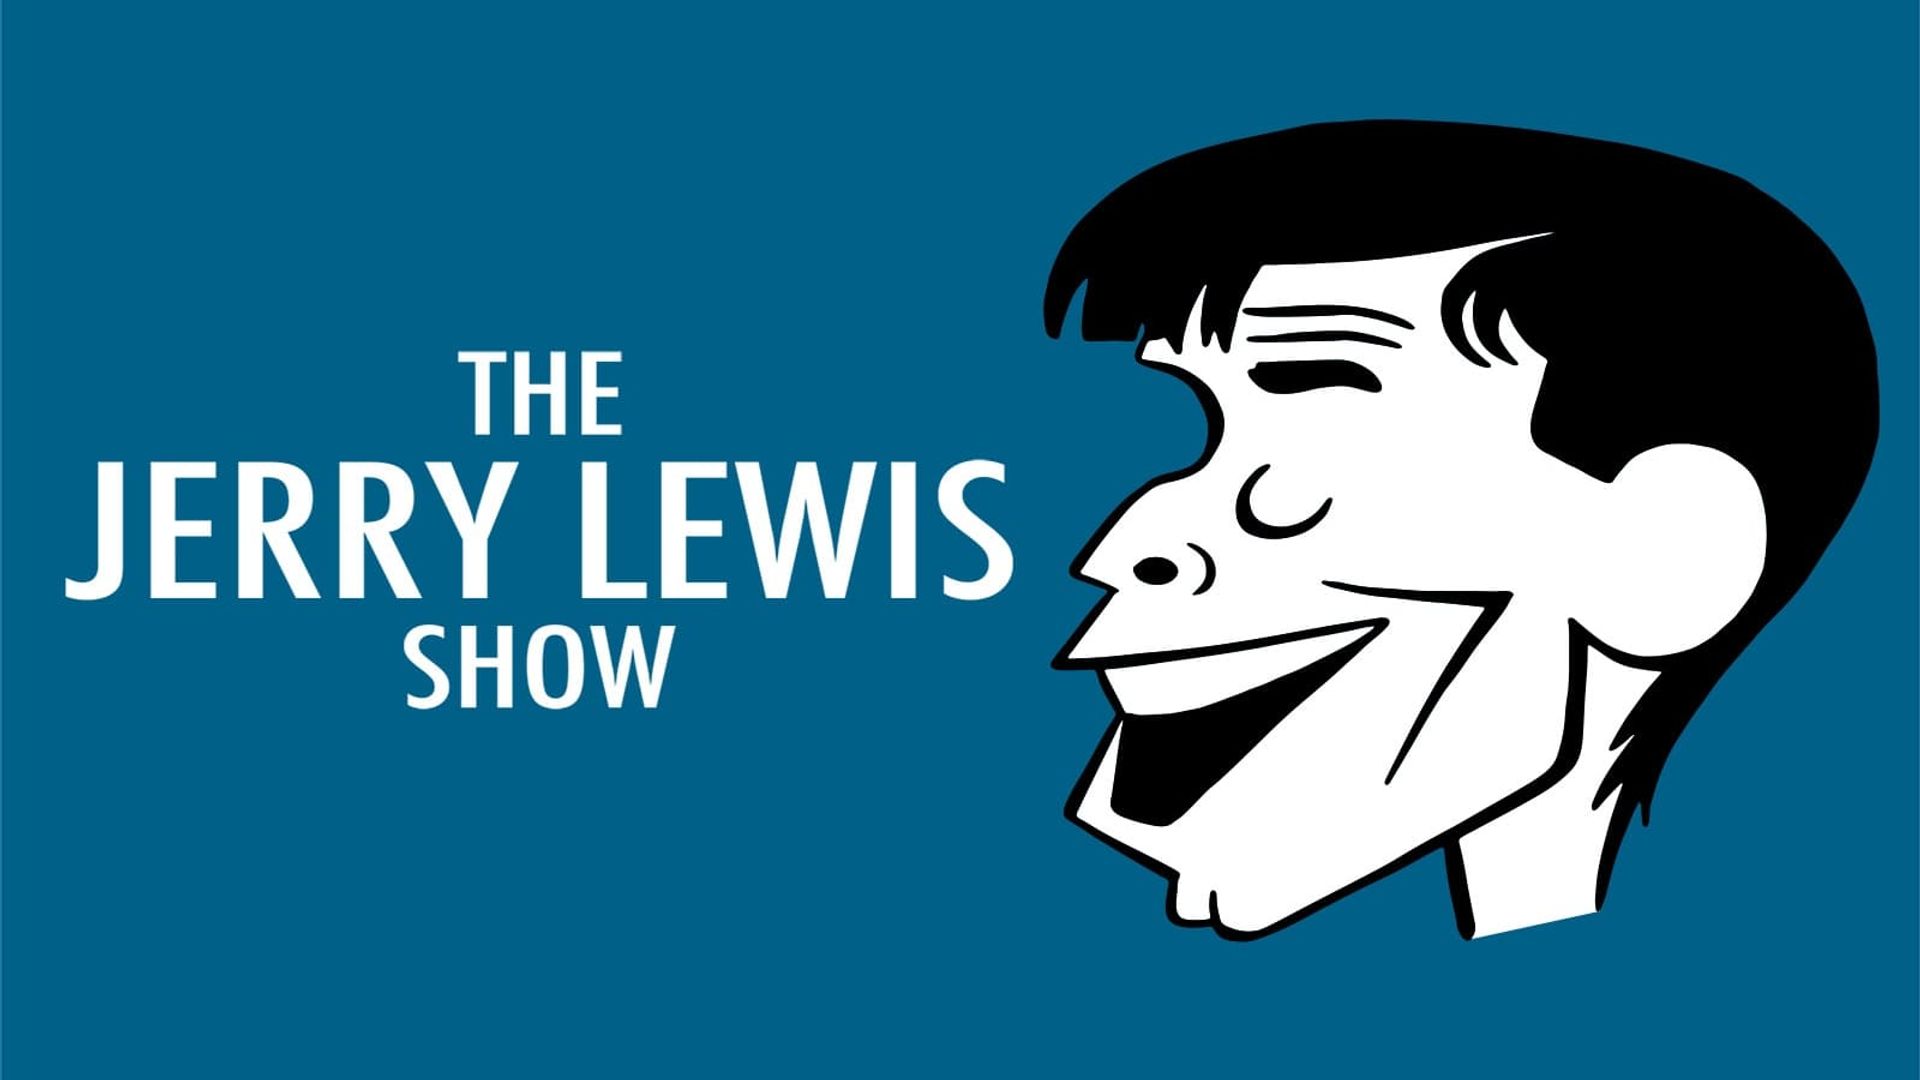 The Jerry Lewis Show background